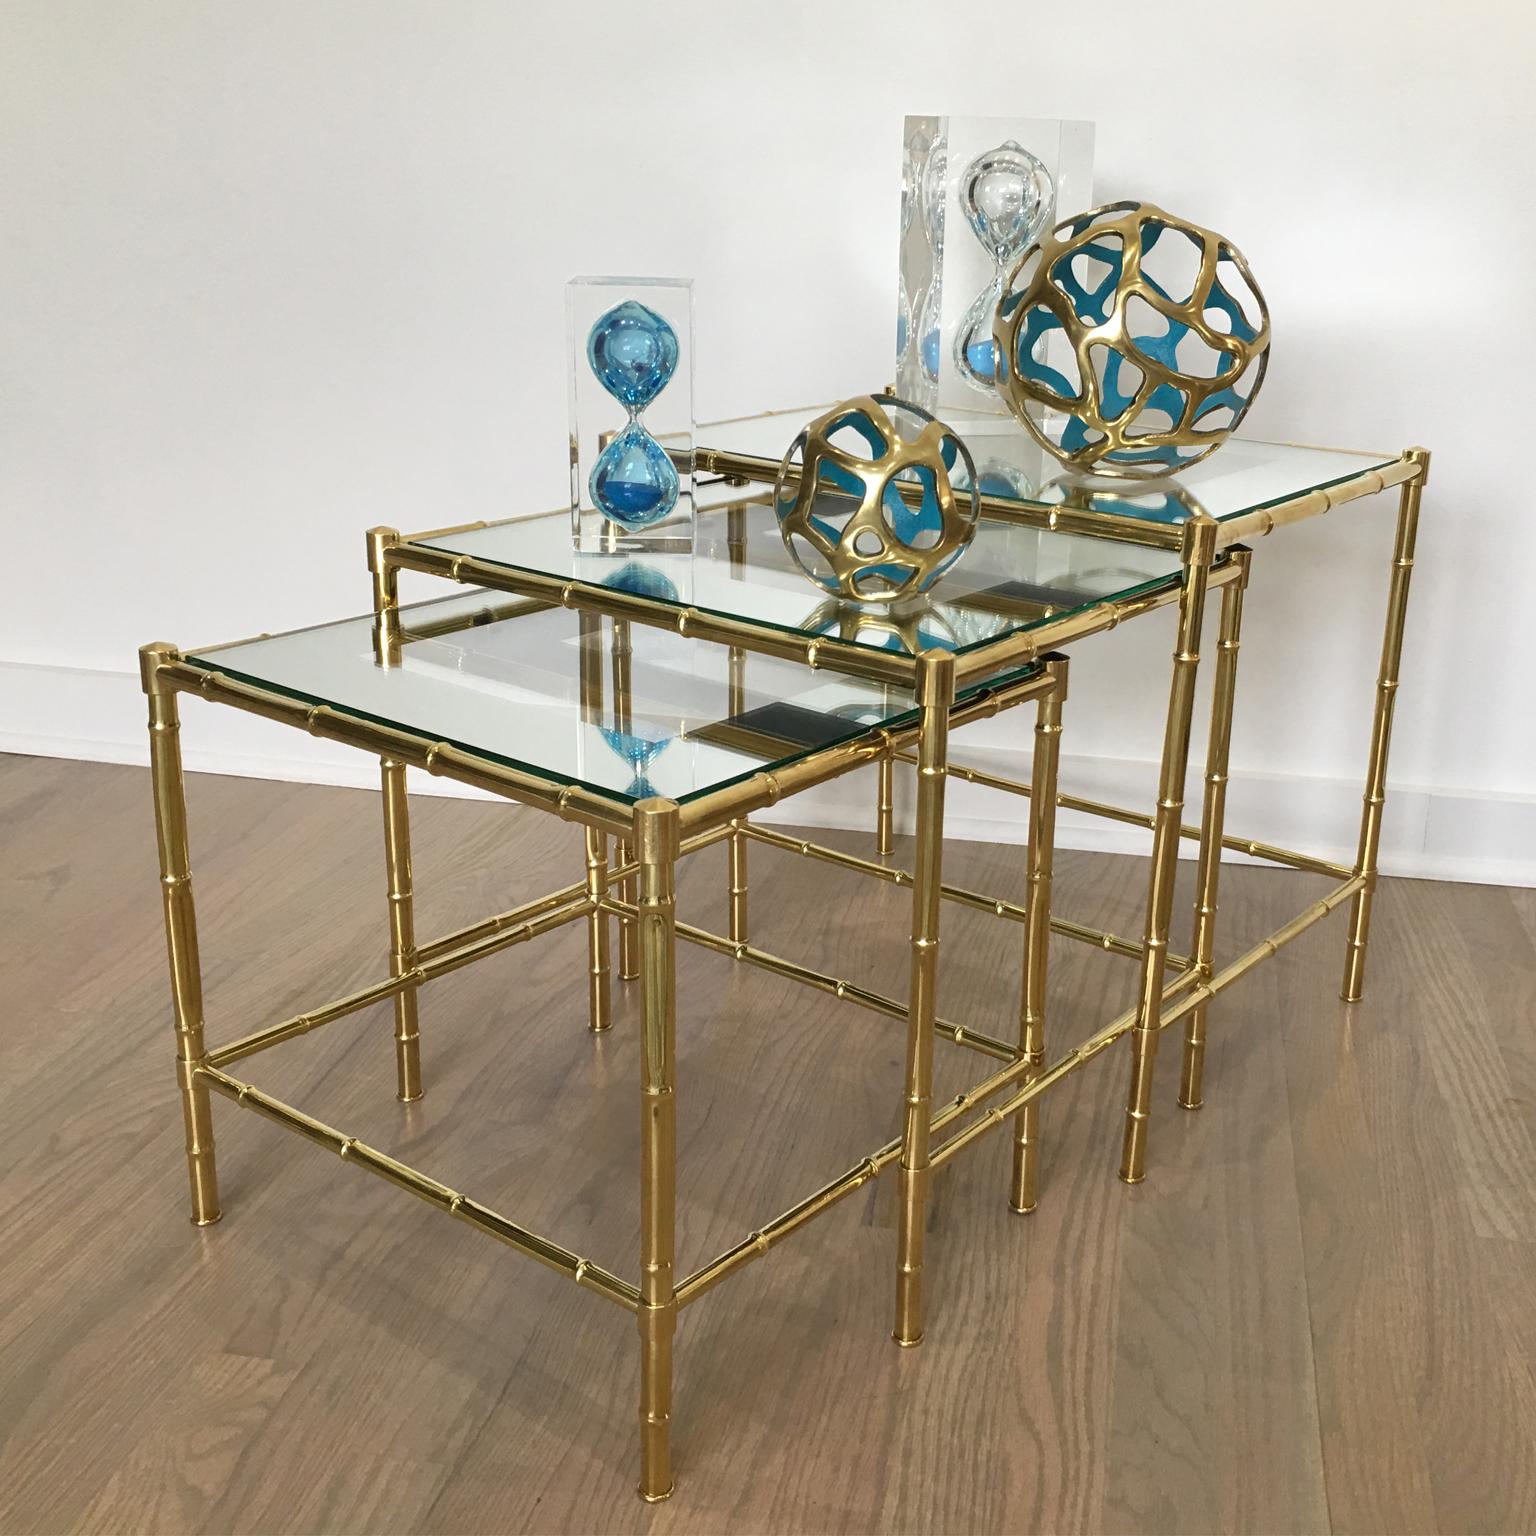 Elegant set of three nesting tables or stacking tables design attributed to Maison Bagues, France. Modernist brass frame with bamboo pattern design. Table tops are clear glass with mirror reserve. Three nice coffee or side tables that can be used